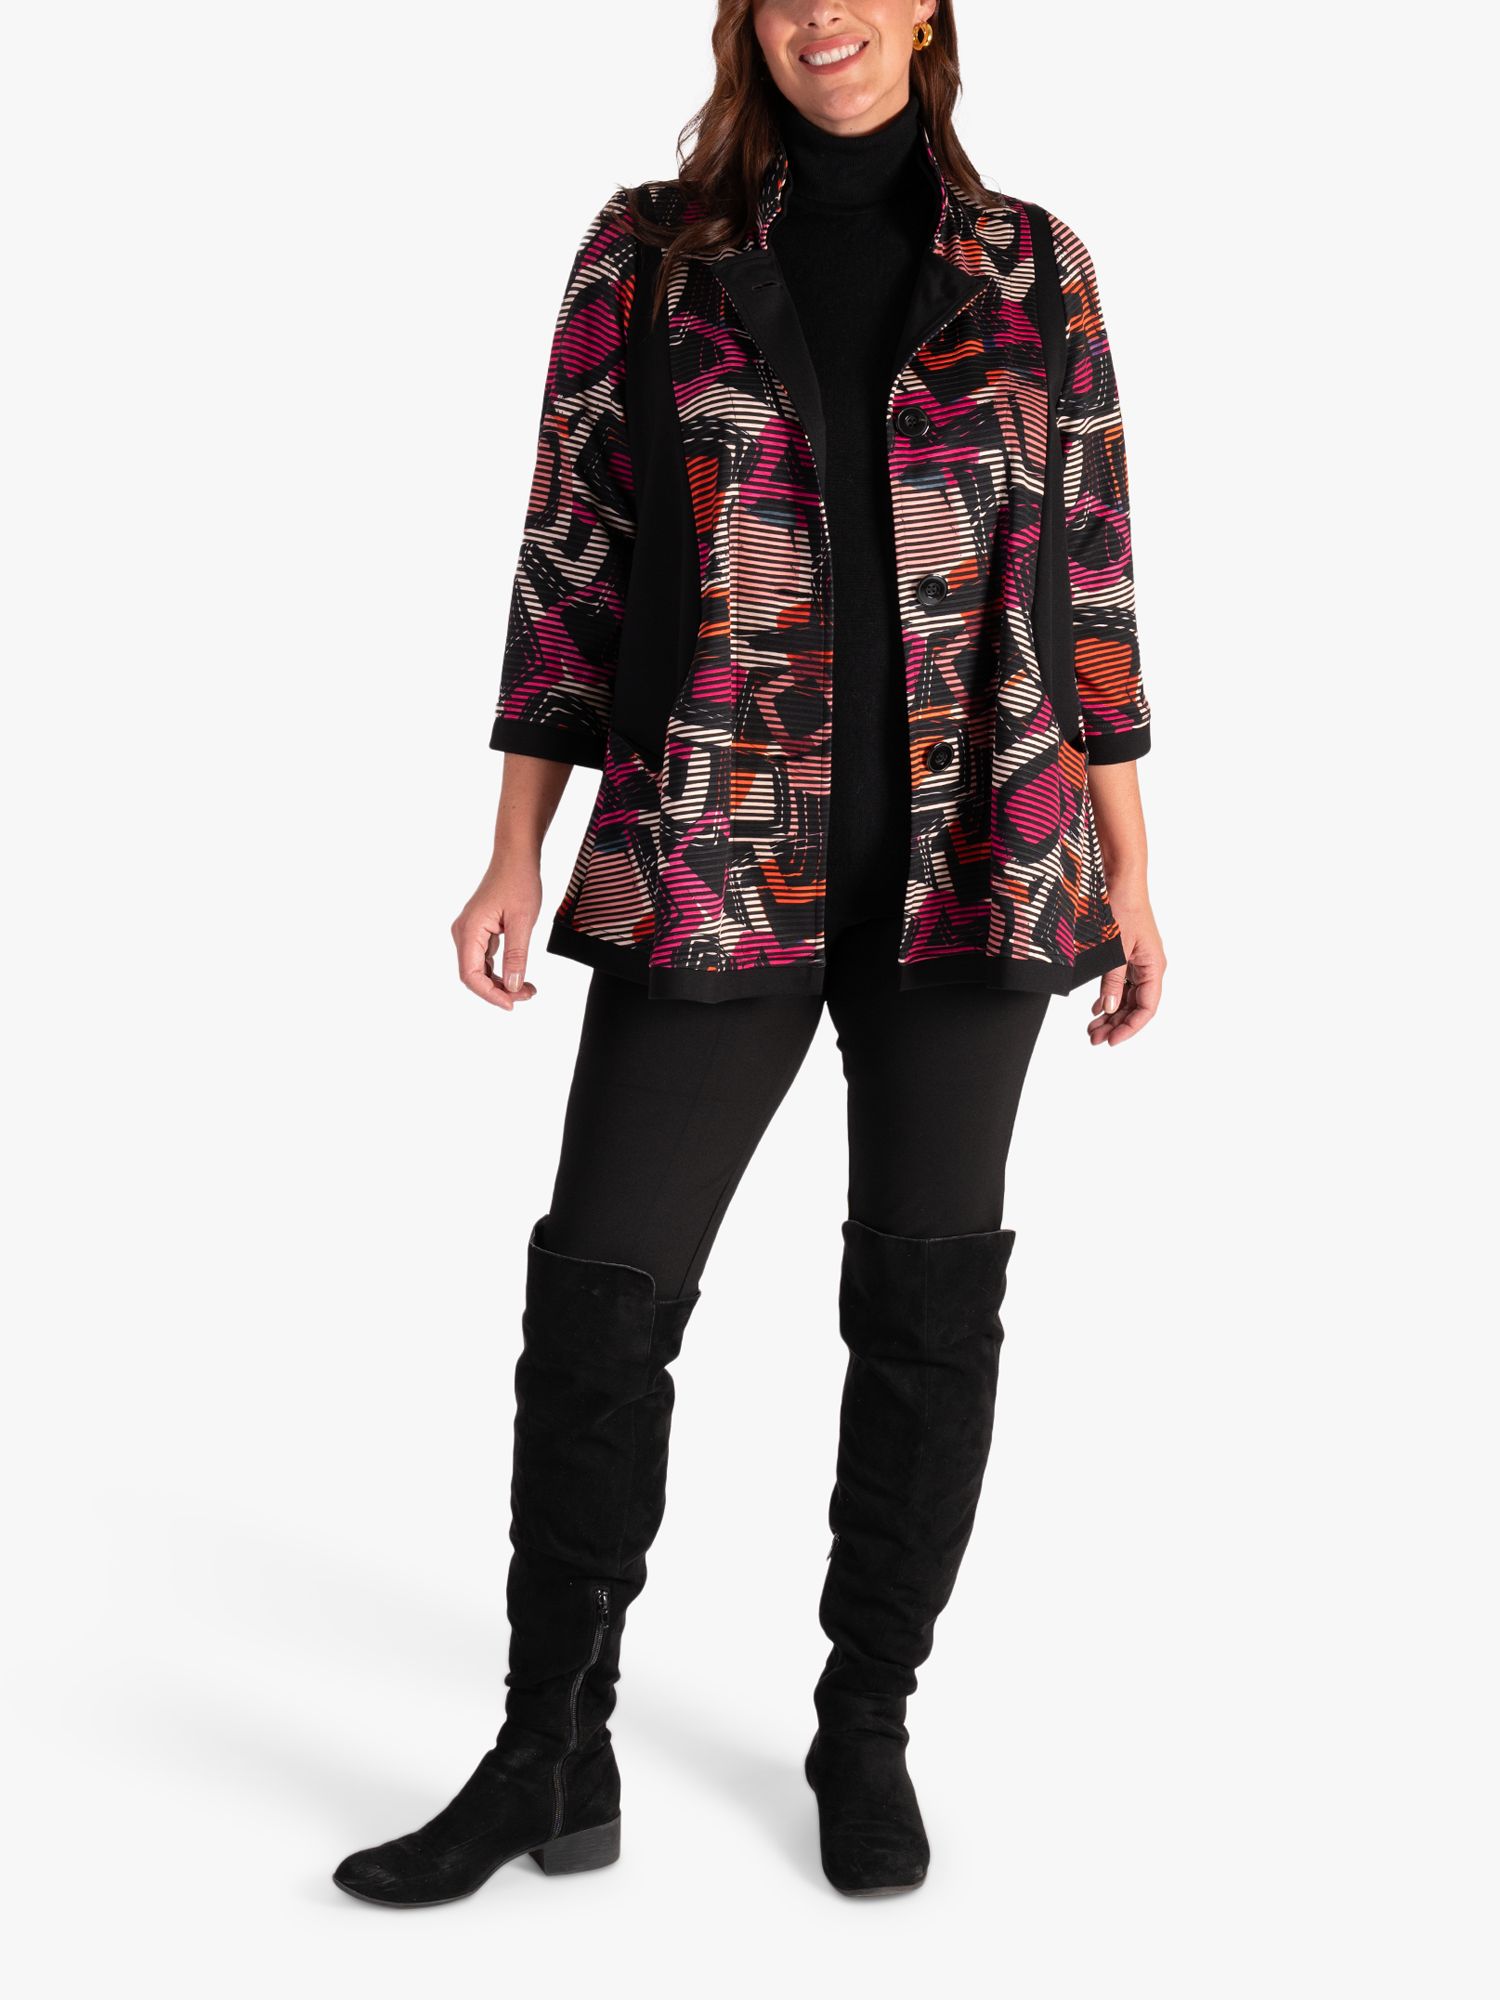 Buy chesca Abstract Geometric Print Contrast Panels Jacket, Black/Peony Online at johnlewis.com